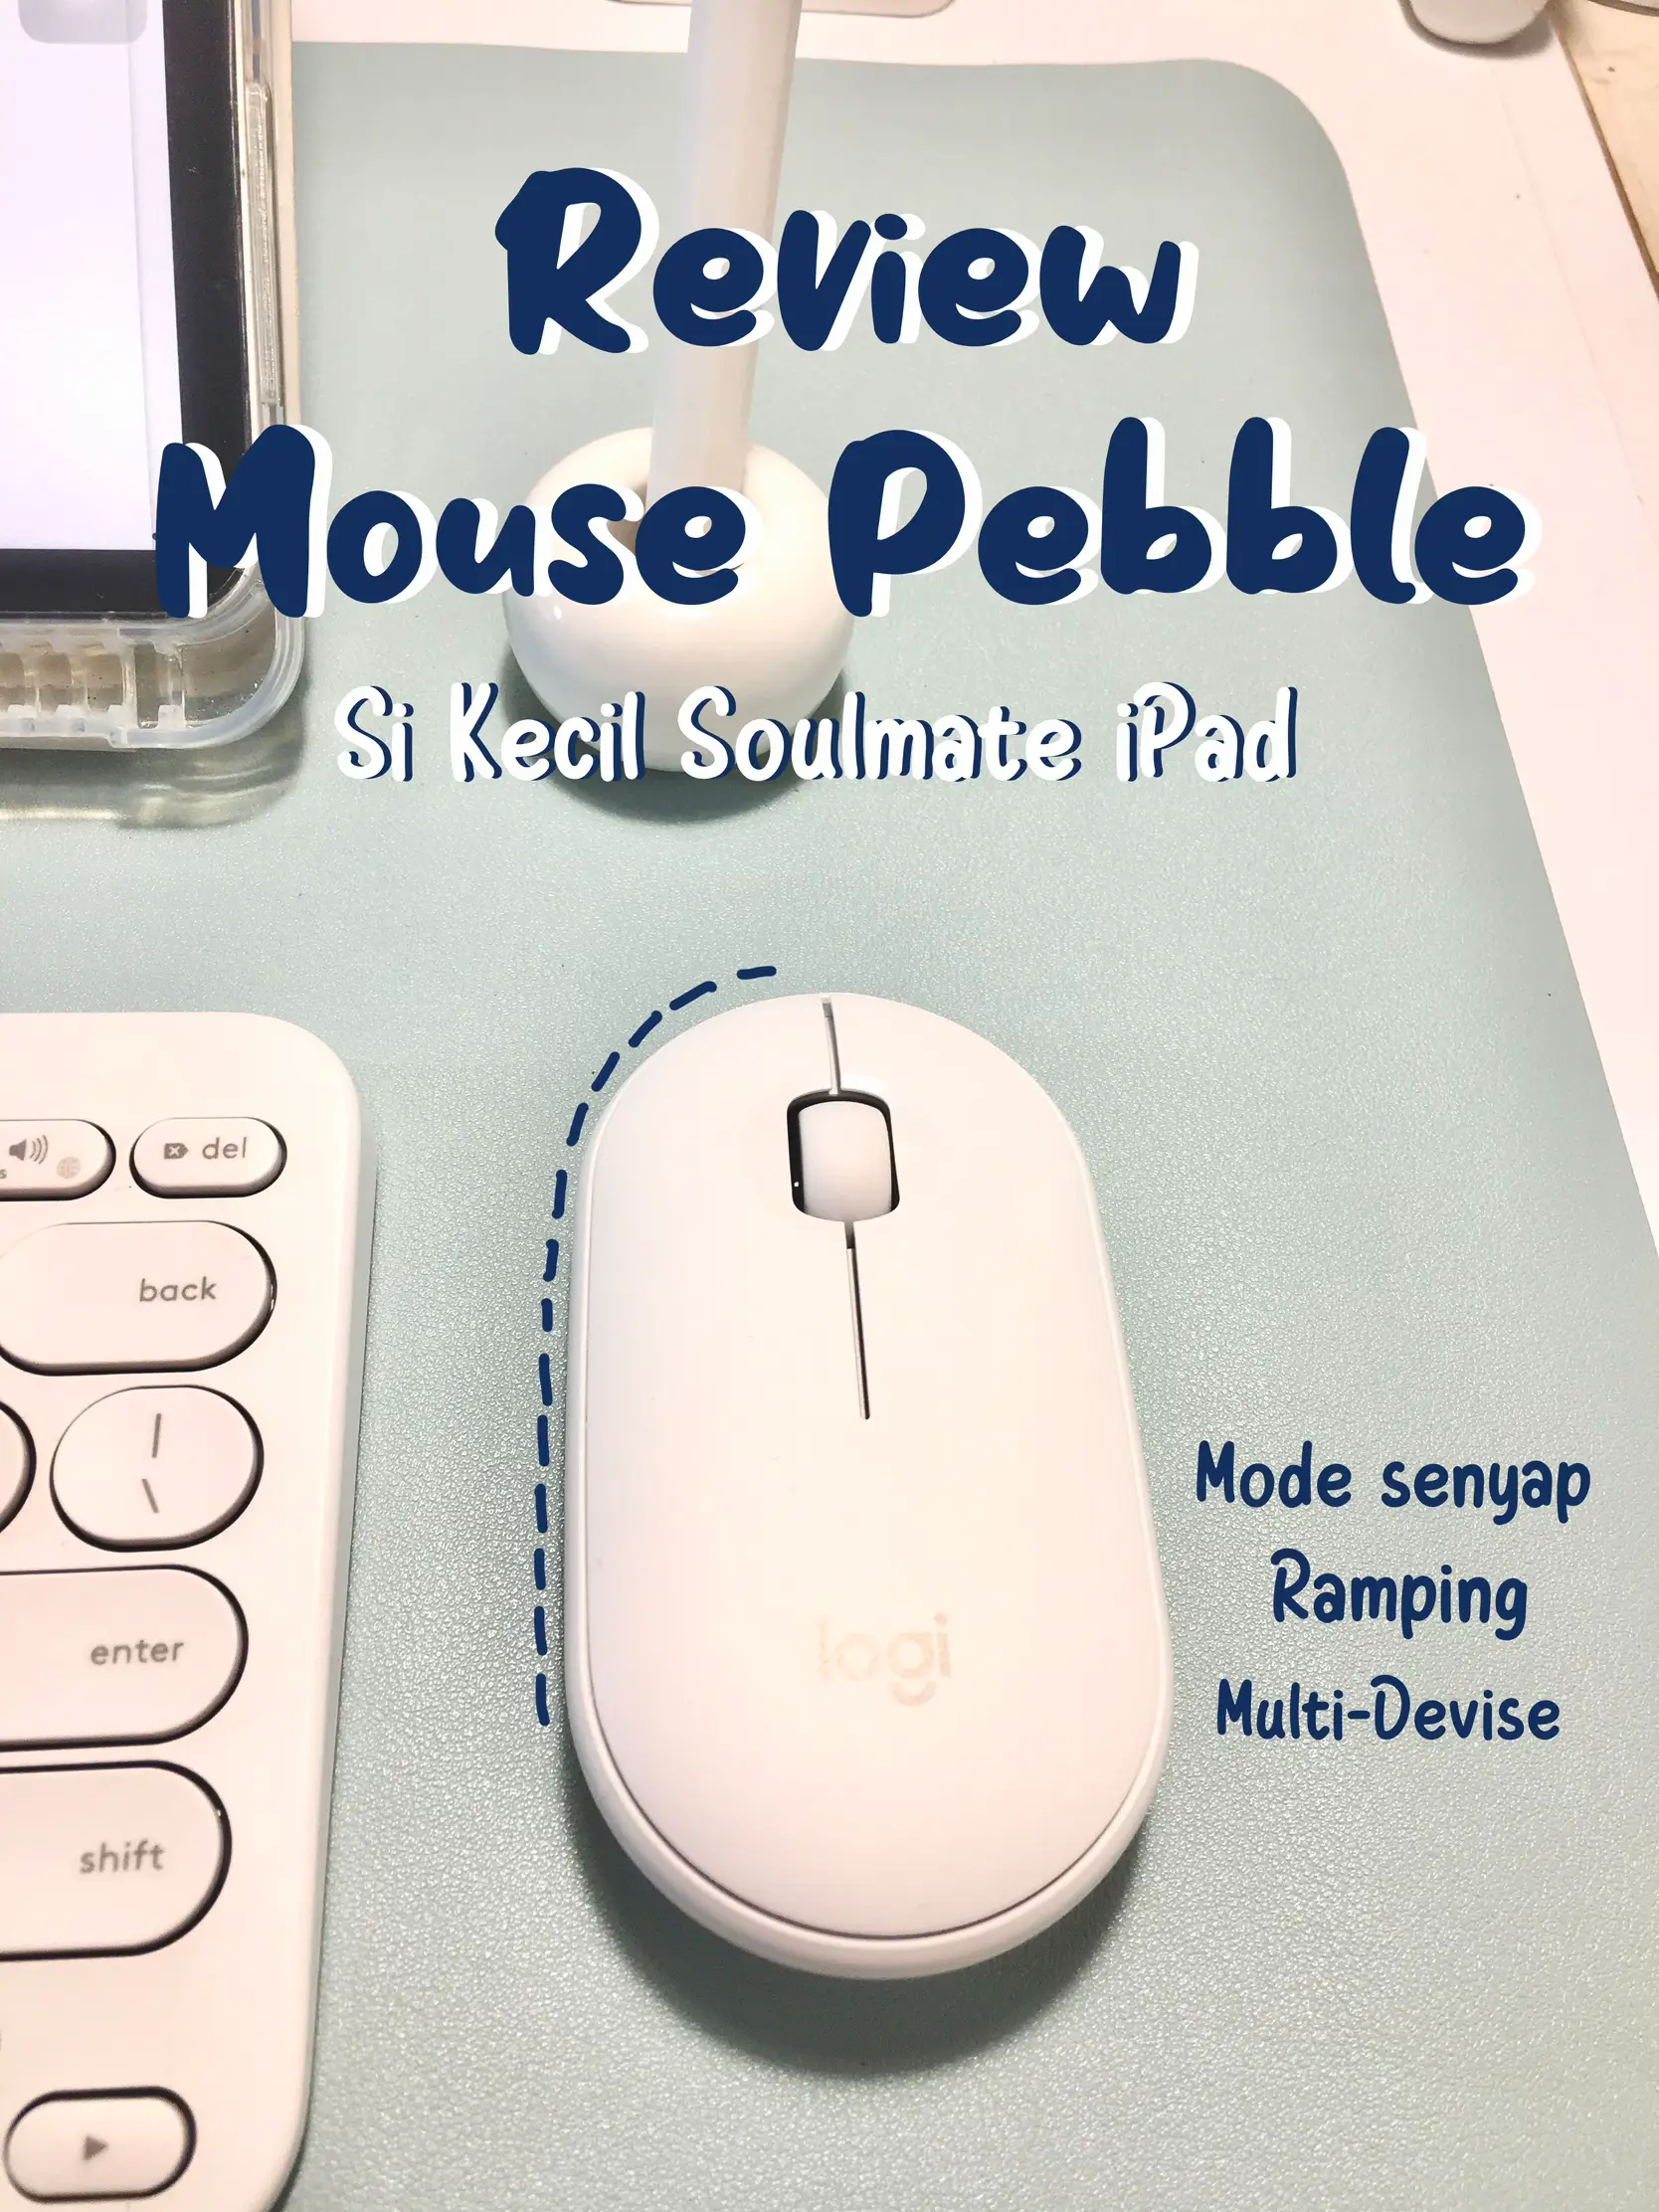 Review Mouse Logitech!!, Gallery posted by Ota_diginote